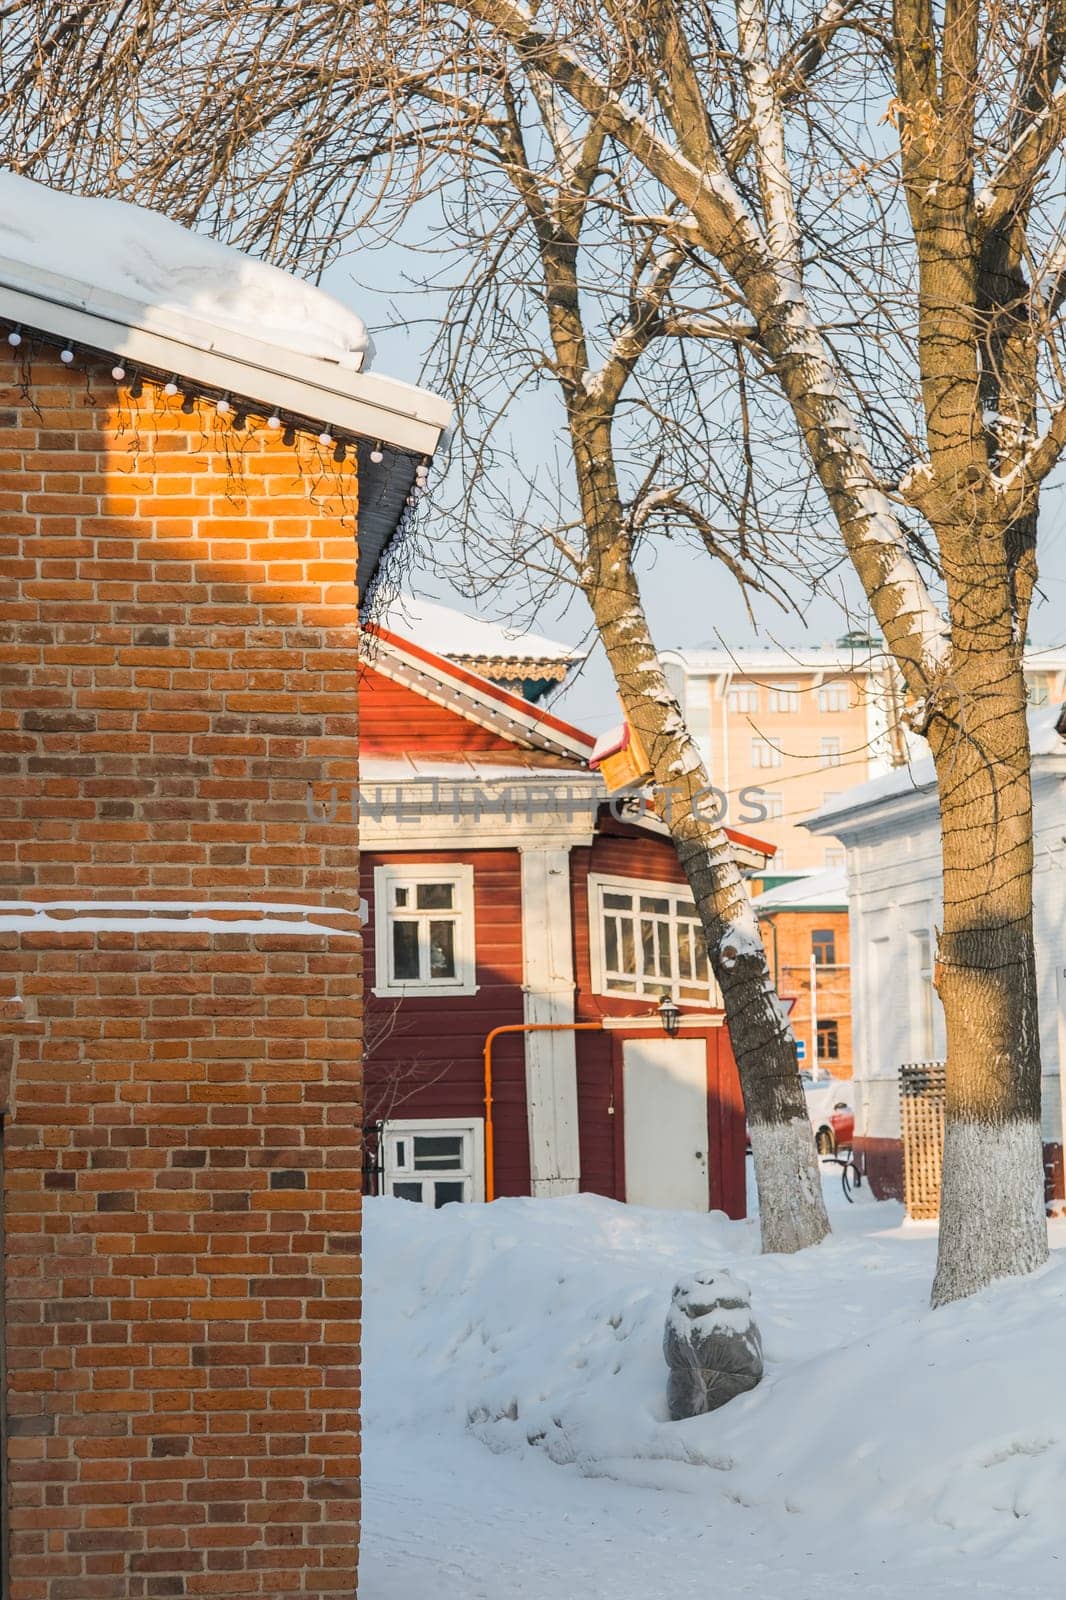 Exterior design of wooden red cottage in snowy town. Winter street with small buildings, cold season in city by Satura86